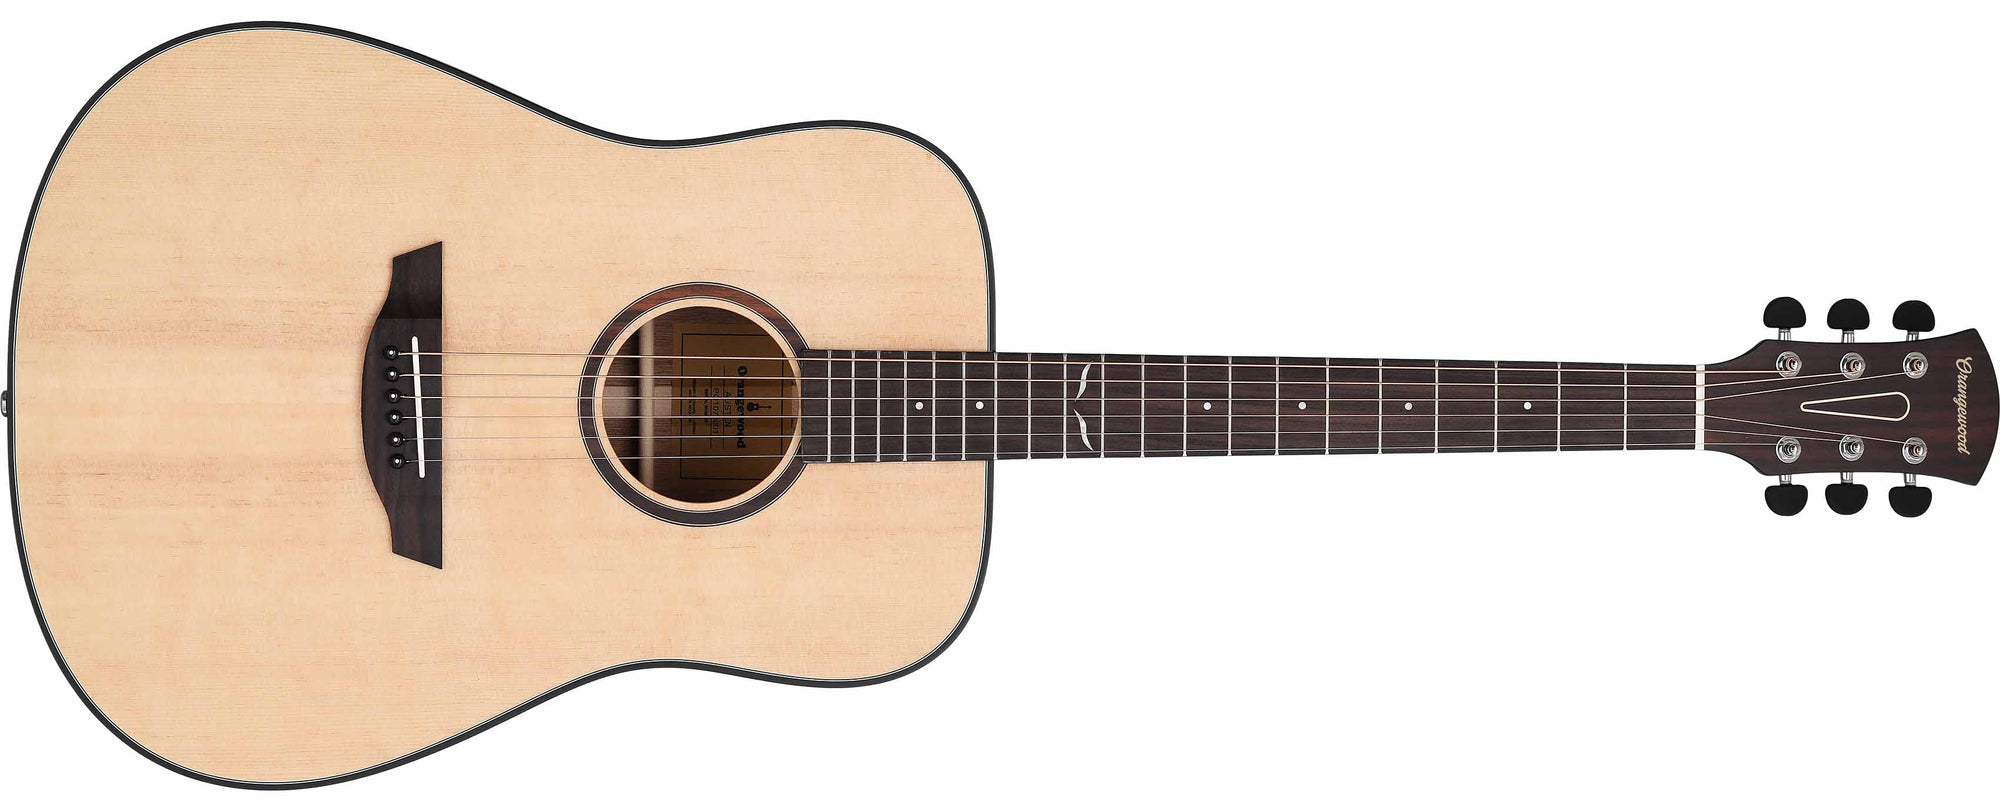 Spruce dreadnought acoustic guitar with rosewood rosette, rosewood fretboard, and silver hardware